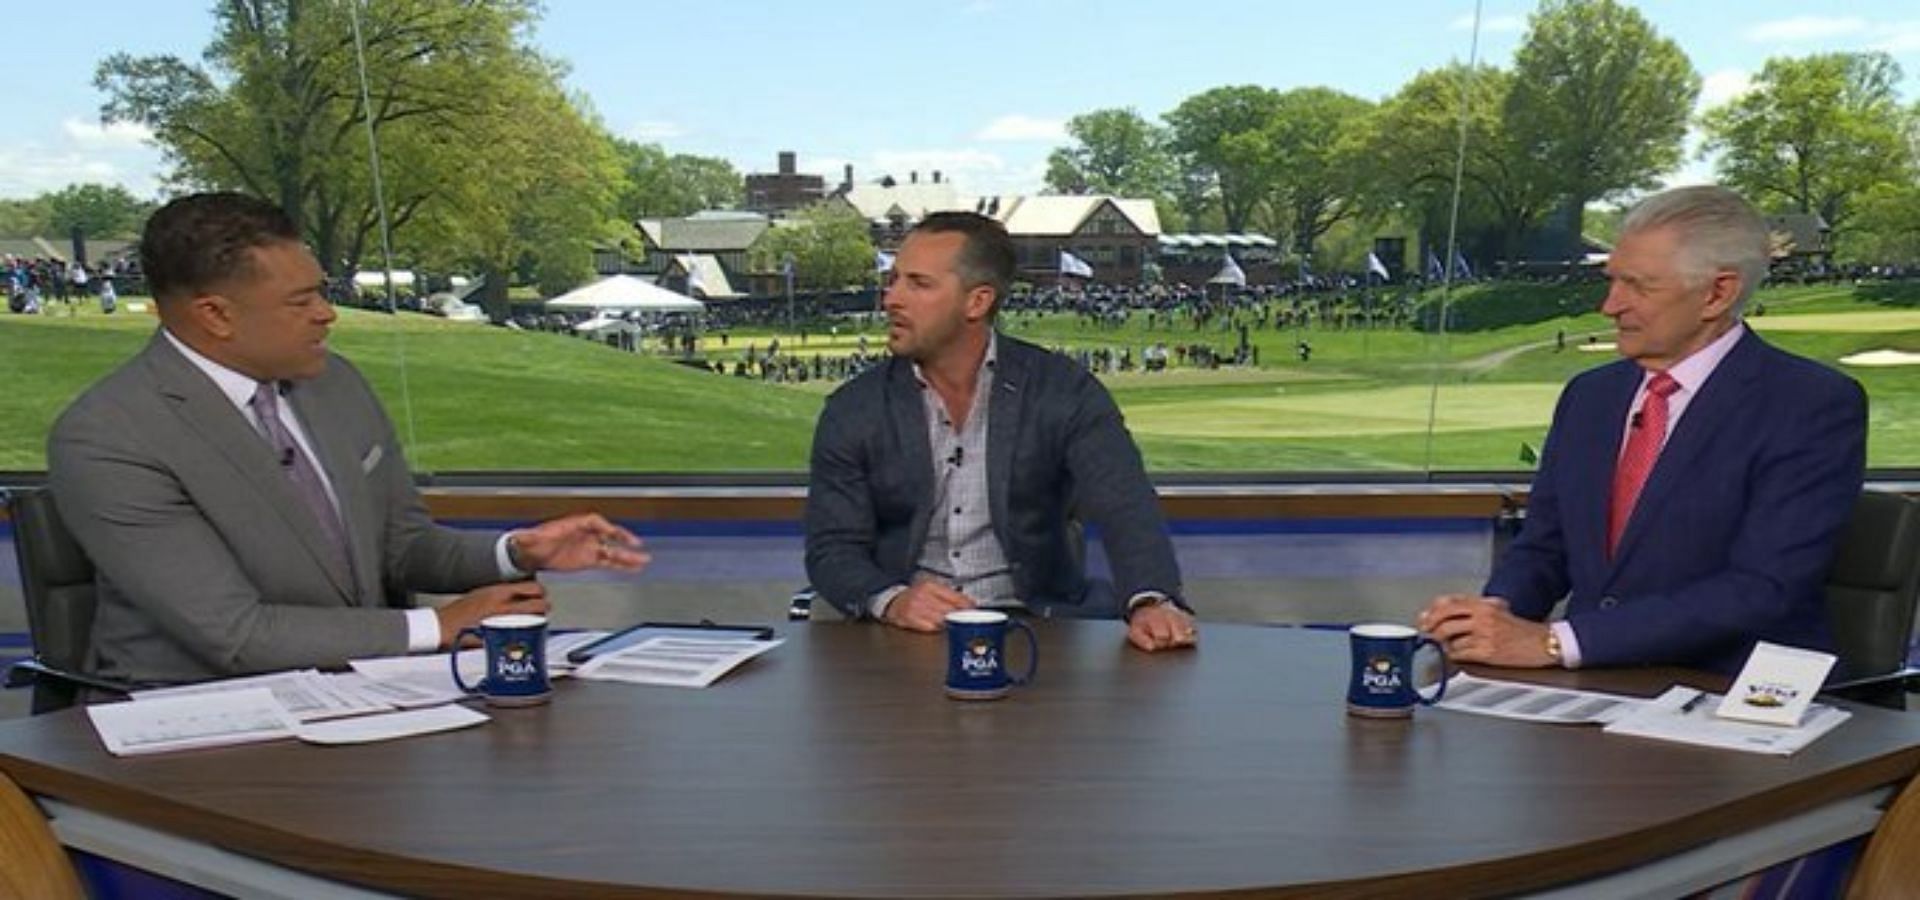 Andy North (right) broadcasting the 2023 PGA Championship (Image via Twitter @AndyHallESPN).